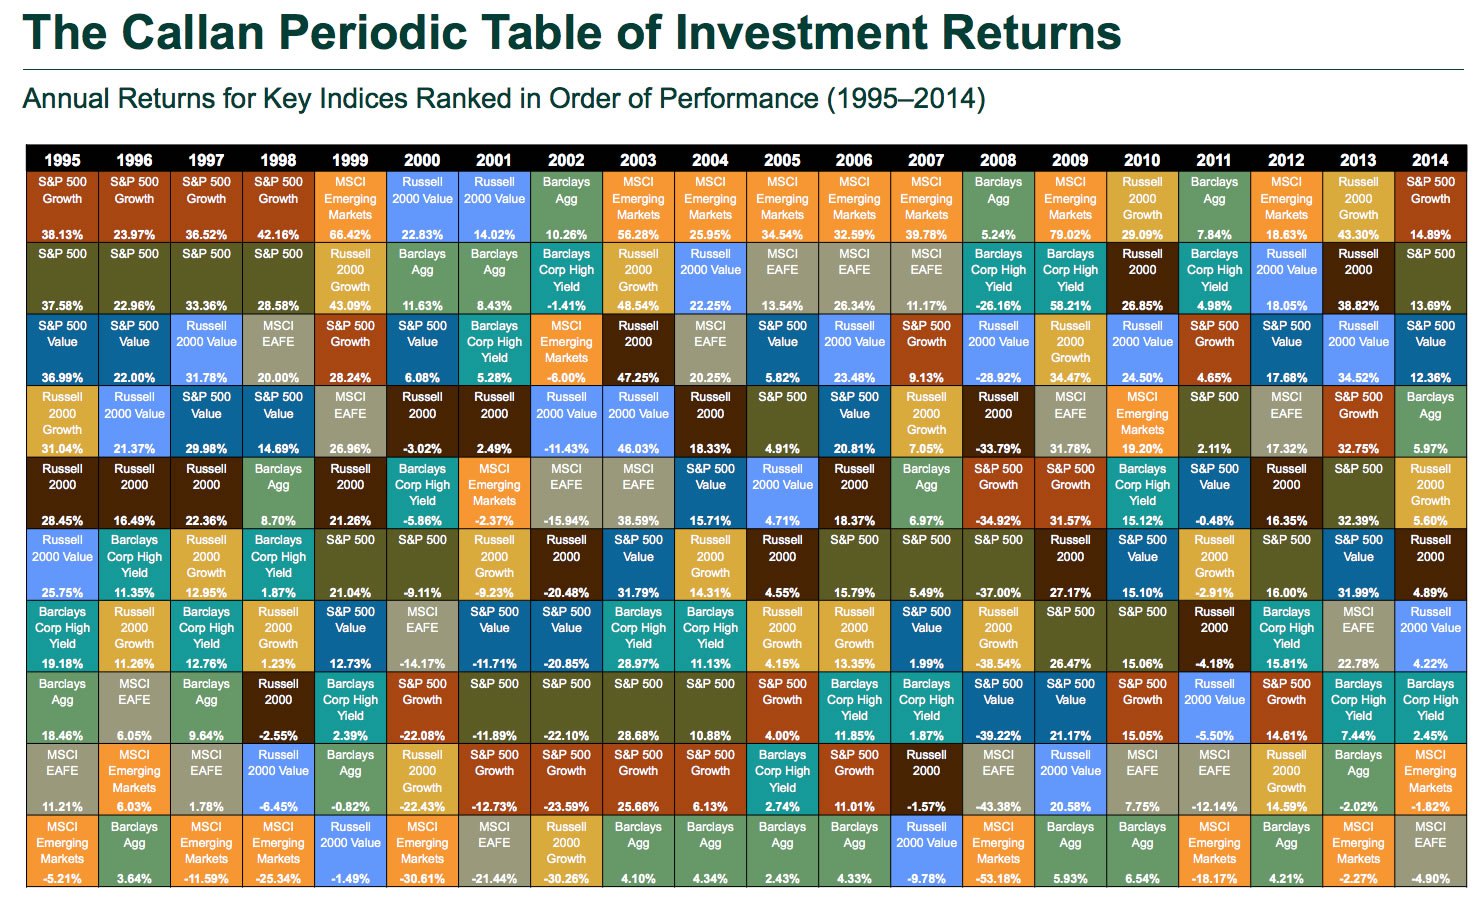 The Callan Periodic Table of Investment Returns graphically depicts annual returns for various asset classes, ranked from best to worst. Well-known, industry-standard market indices are used as proxies for each asset class.